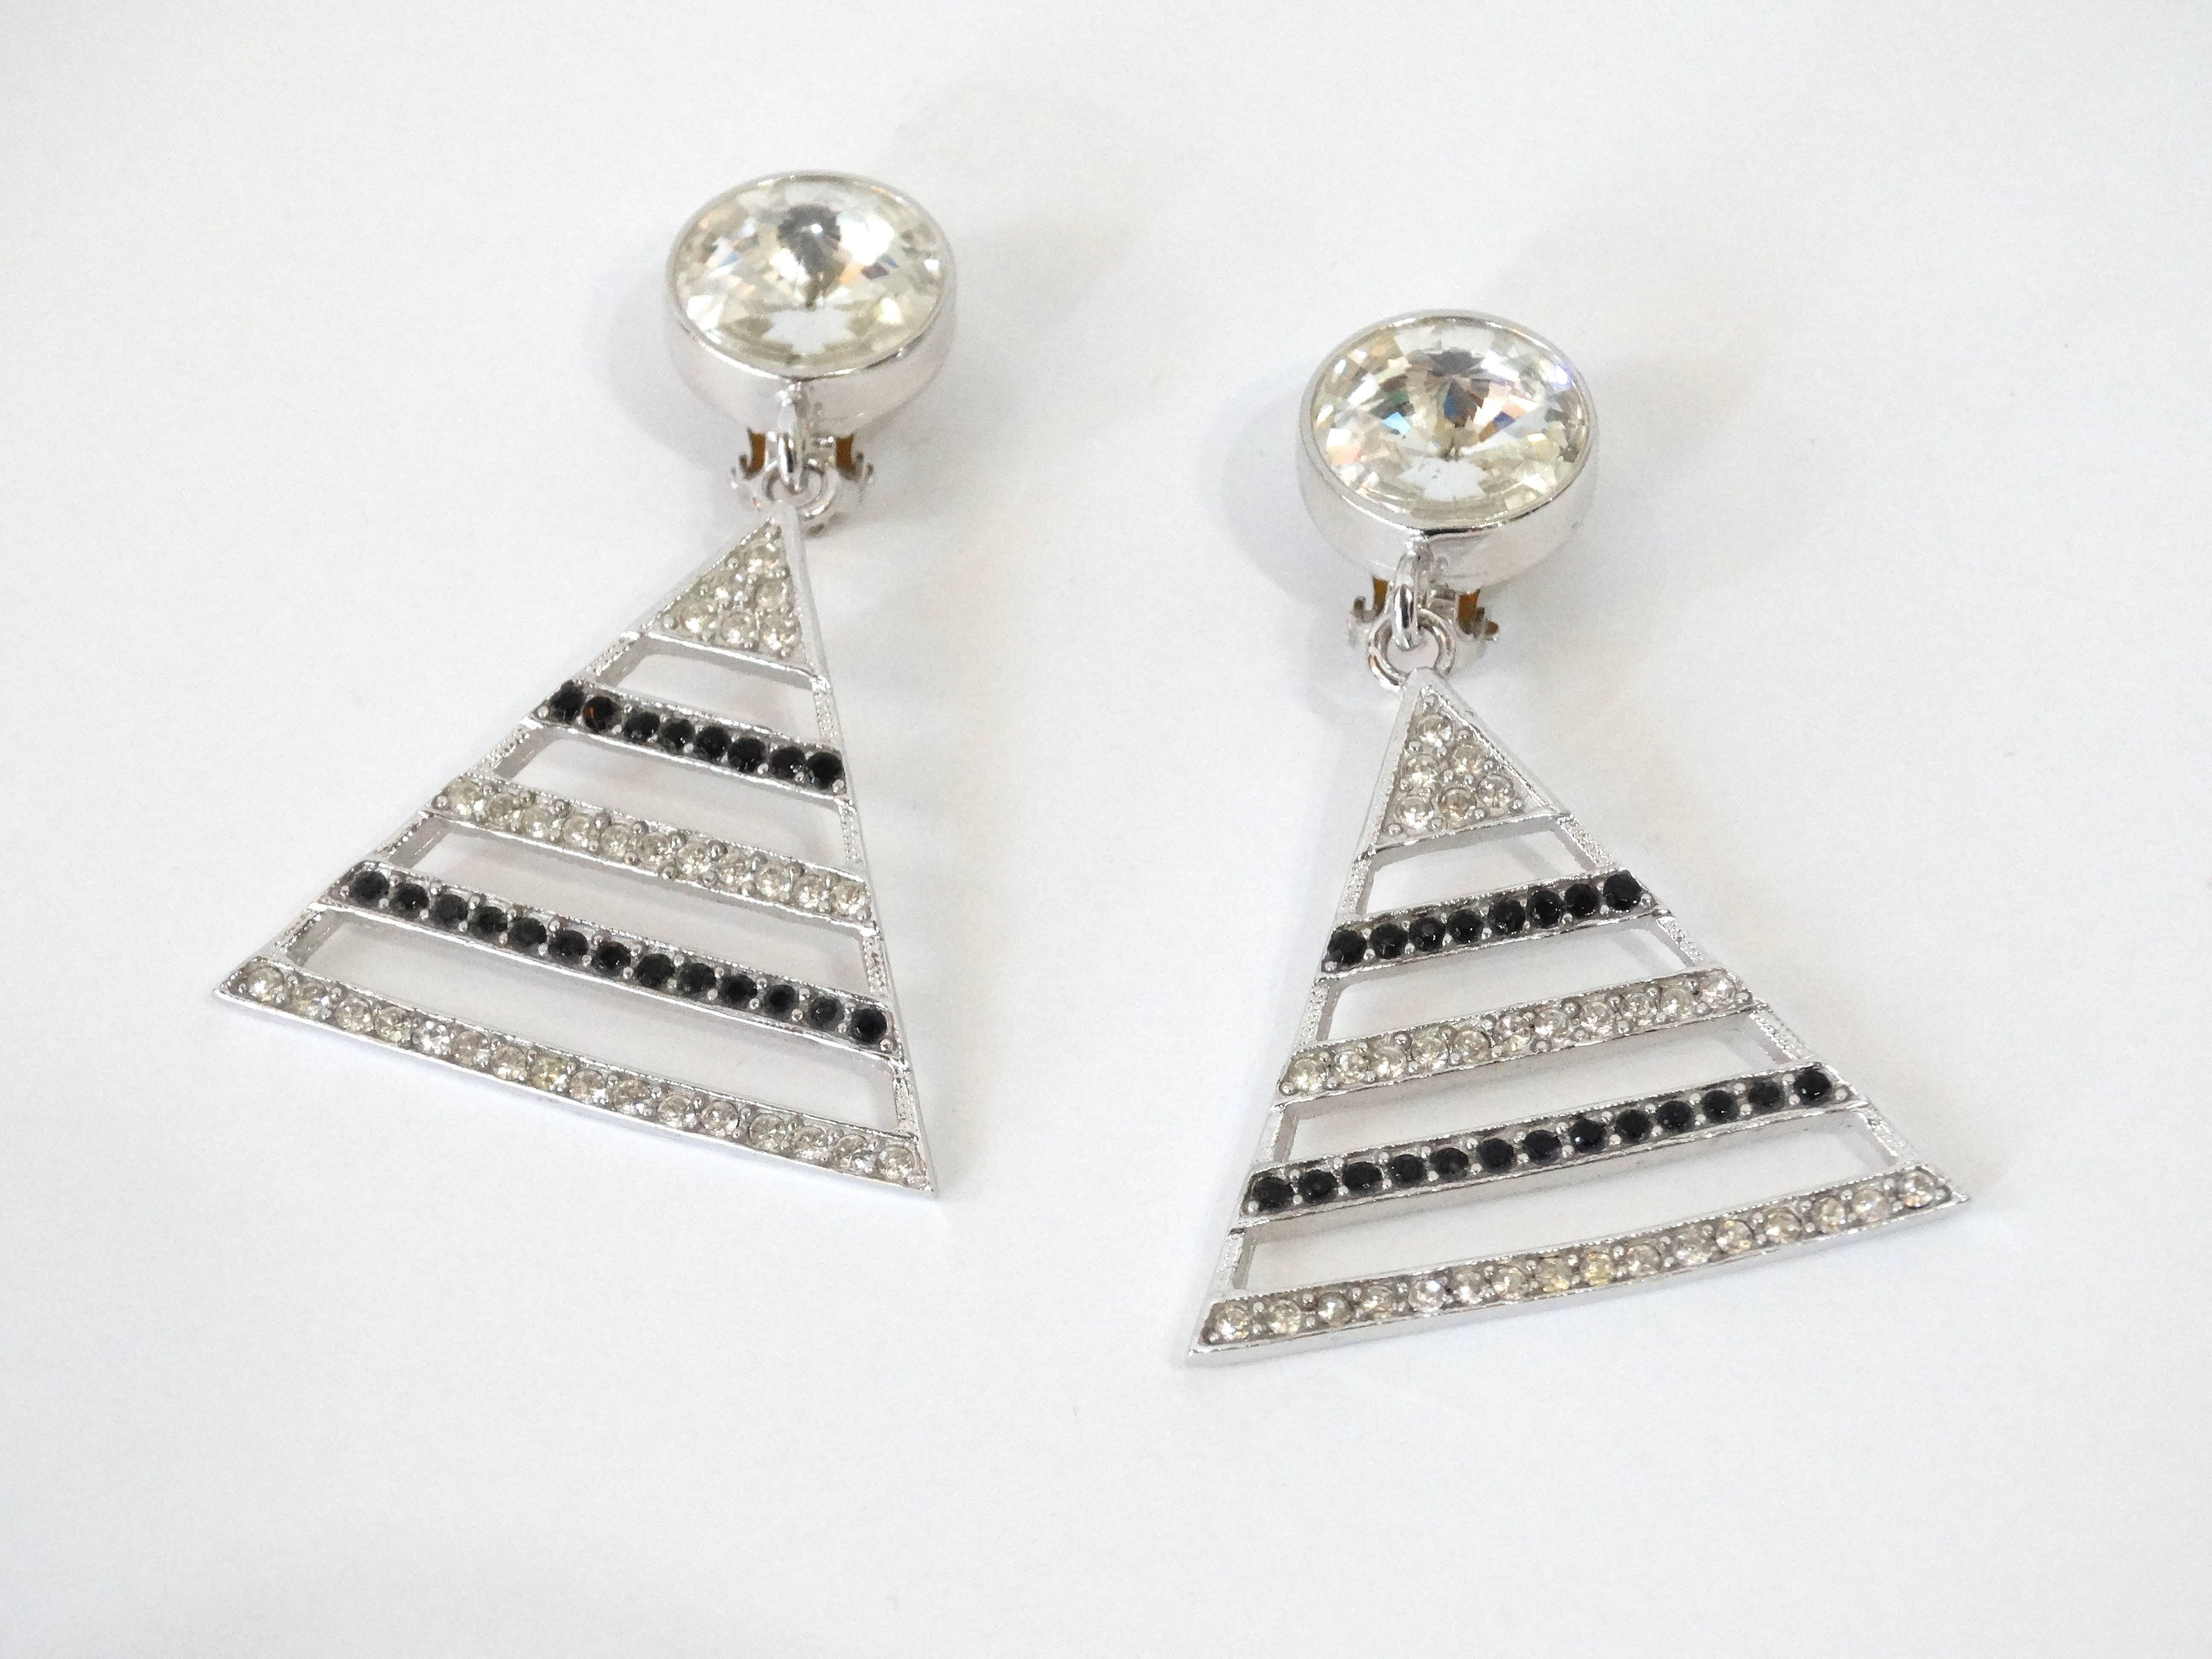 Funky Alexis Kirk 1980's runway earrings in silver with black crystal rhinestones and clear crystal rhinestones. Great shape circular crystal clip-ons with a dangling triangle.  signed Alexis Kirk on each earring.

Measurements

3 inches x 1.5